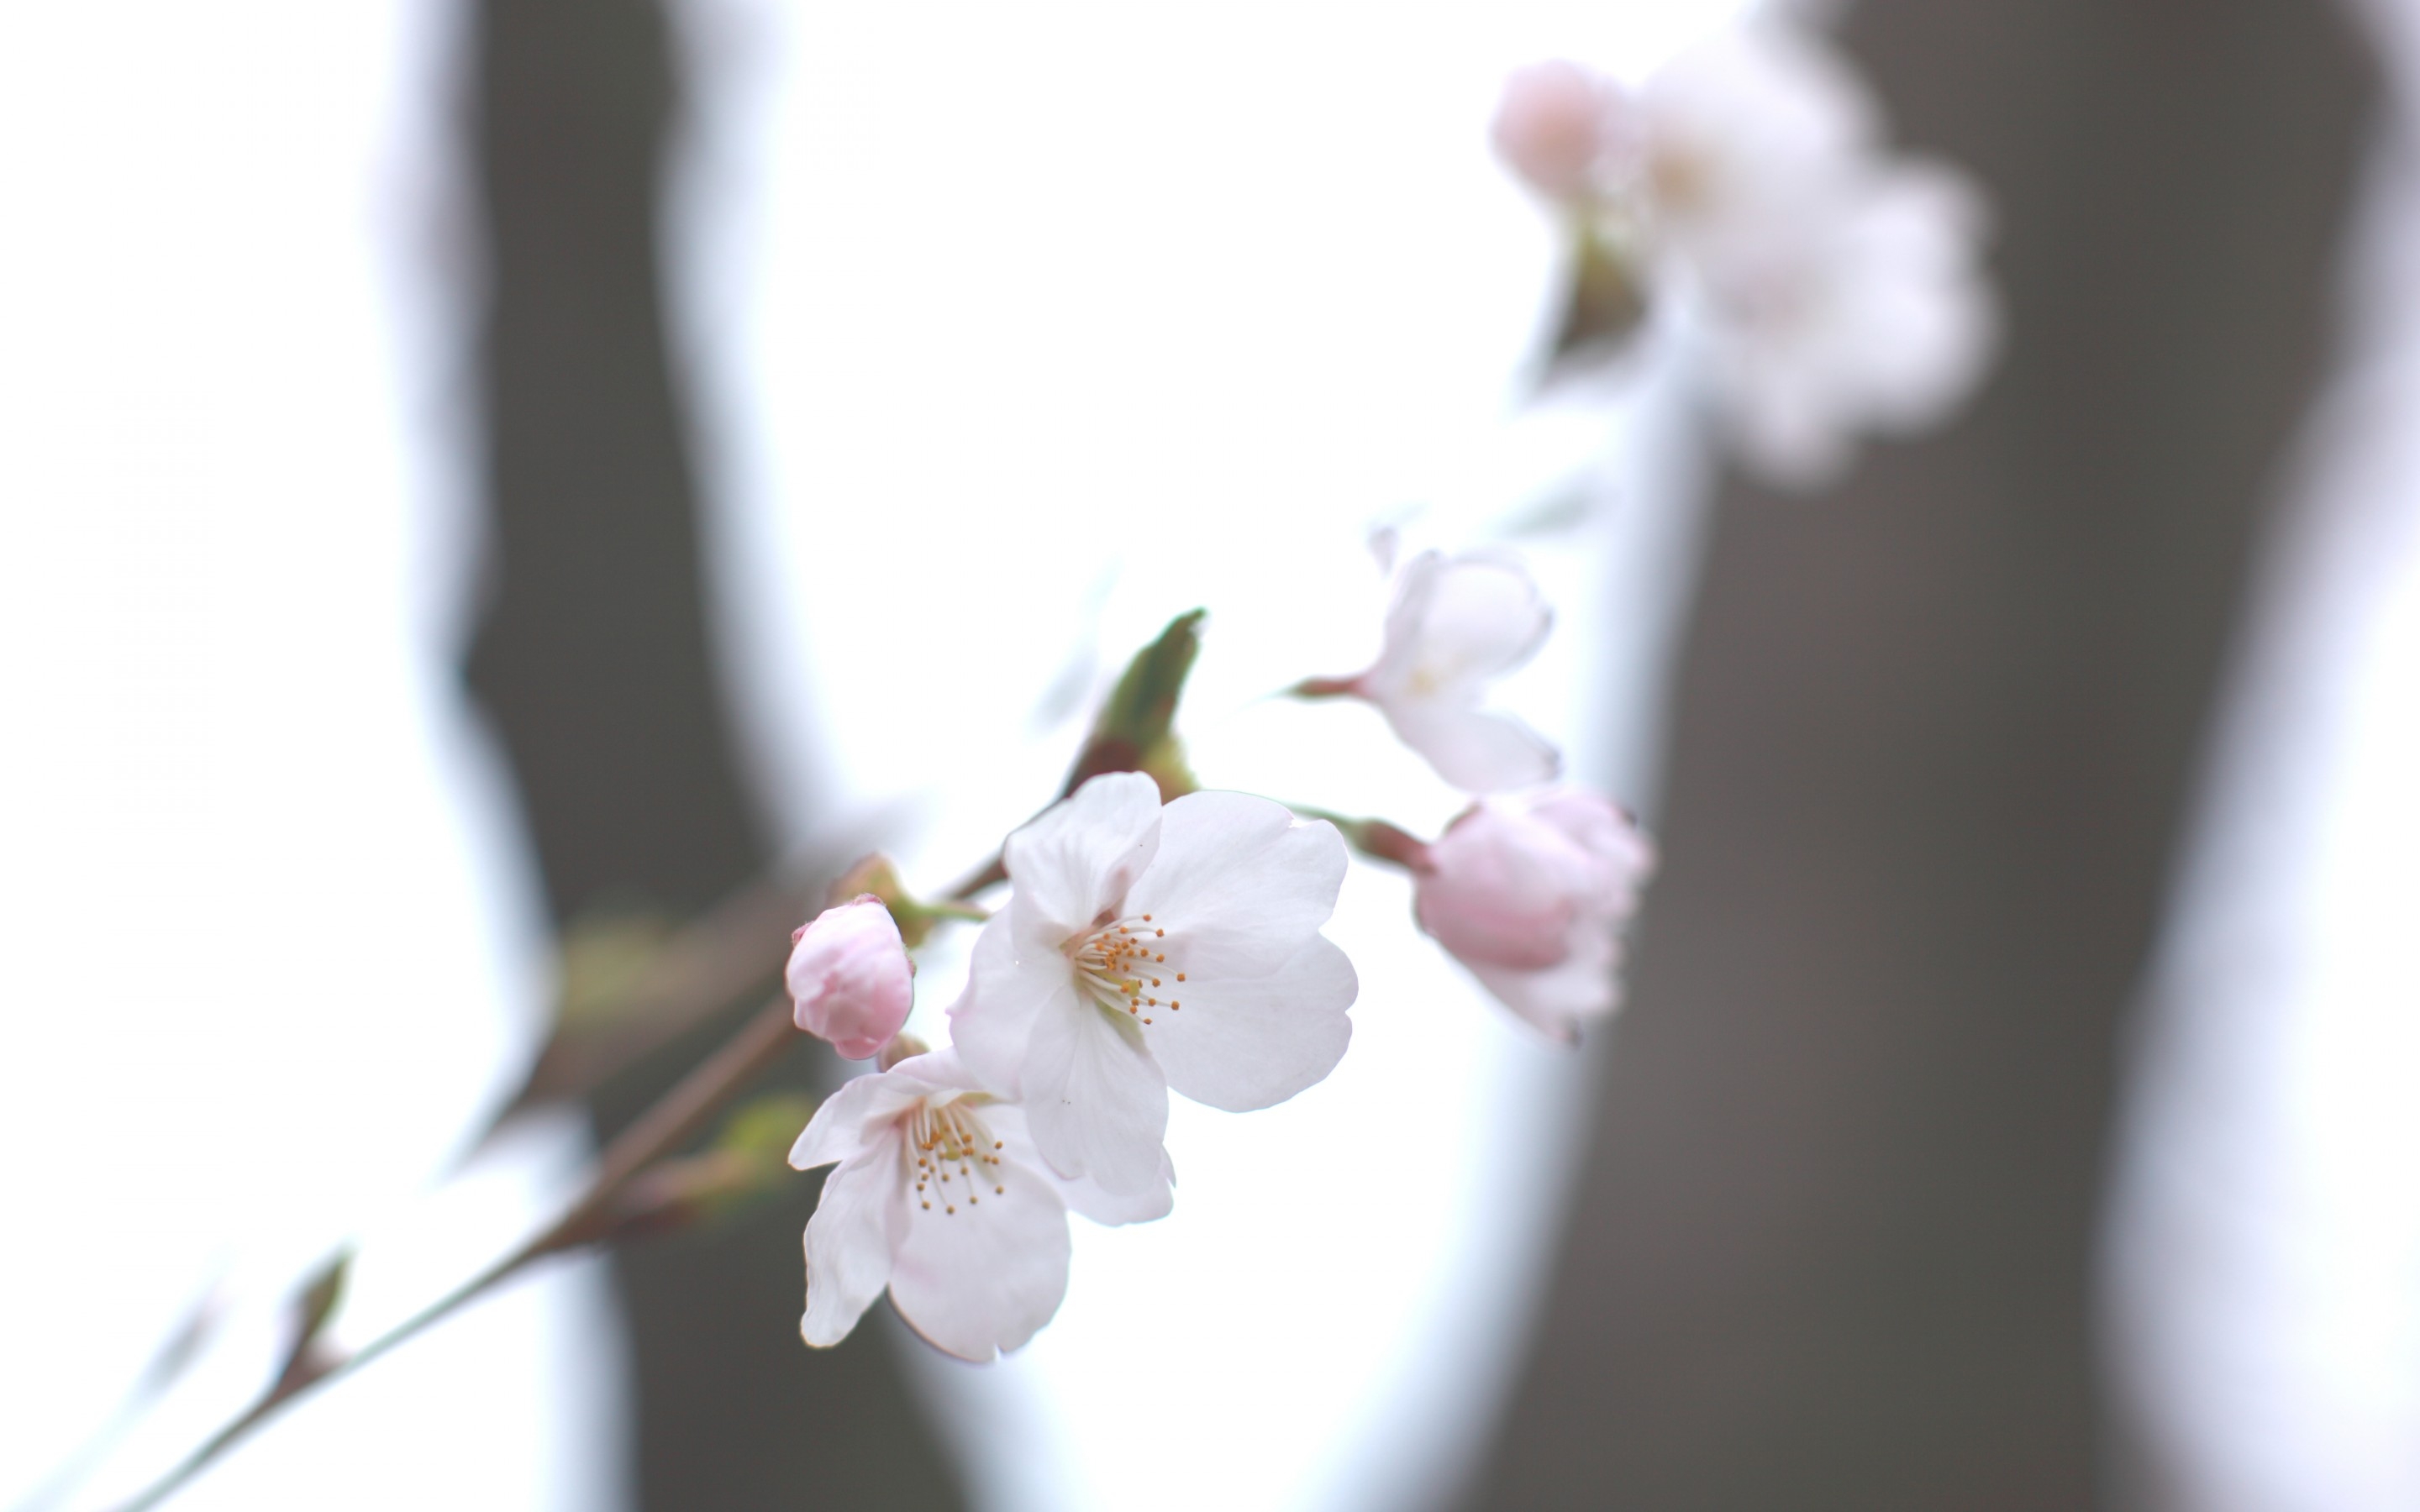 84615 download wallpaper white, spring, sky, cherry, sakura, macro, shine, light, blur, smooth, twig, sprig screensavers and pictures for free